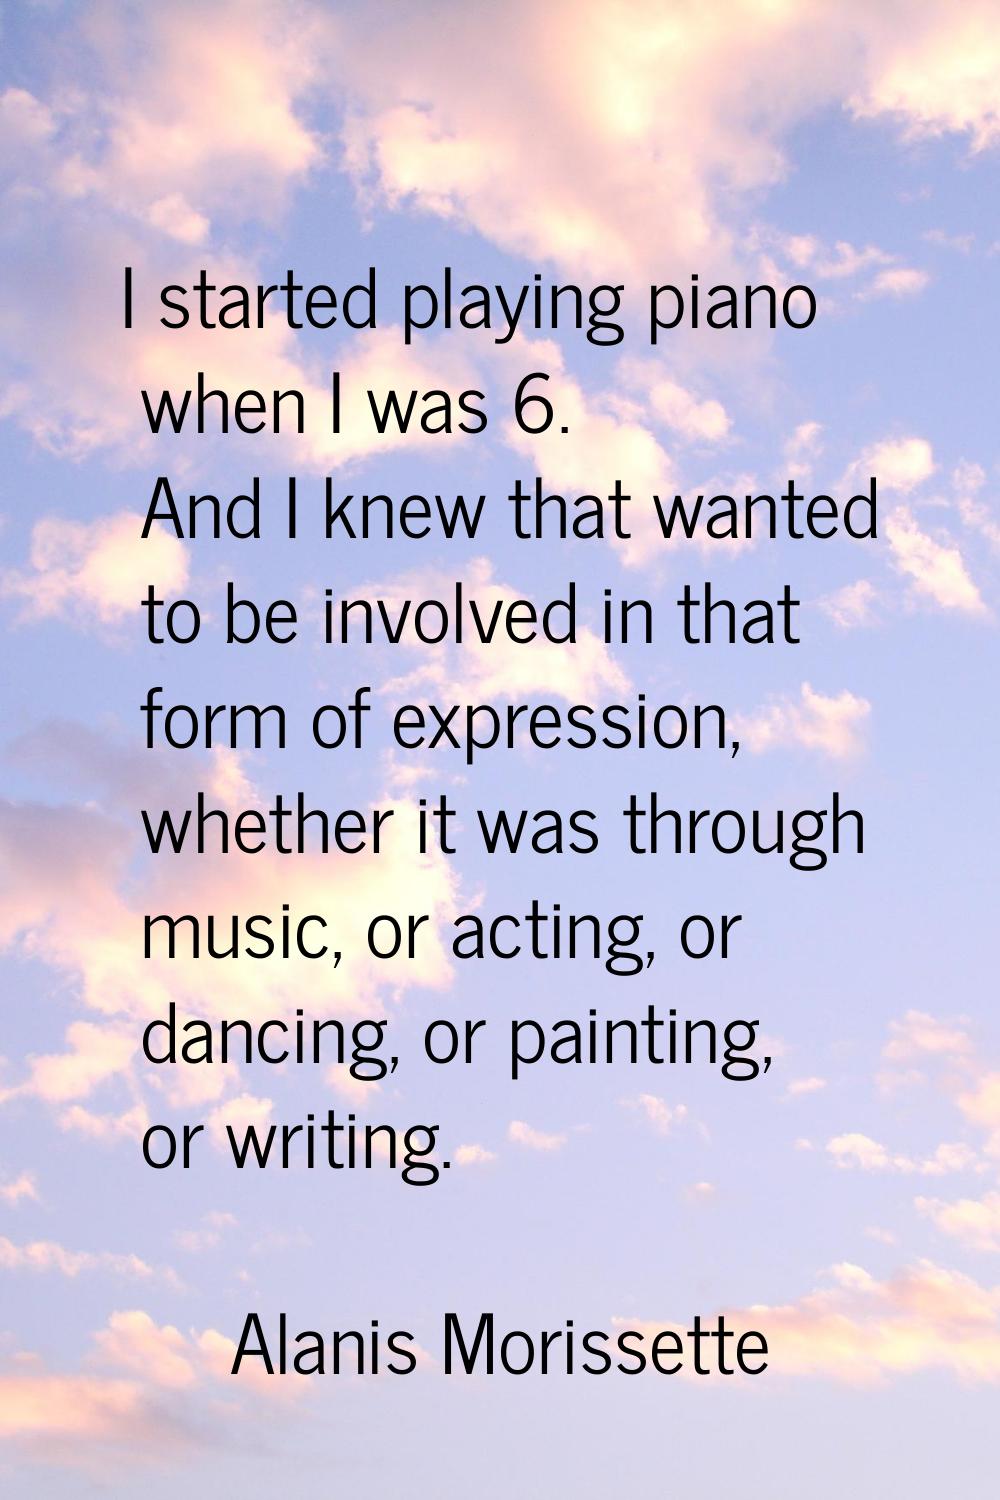 I started playing piano when I was 6. And I knew that wanted to be involved in that form of express